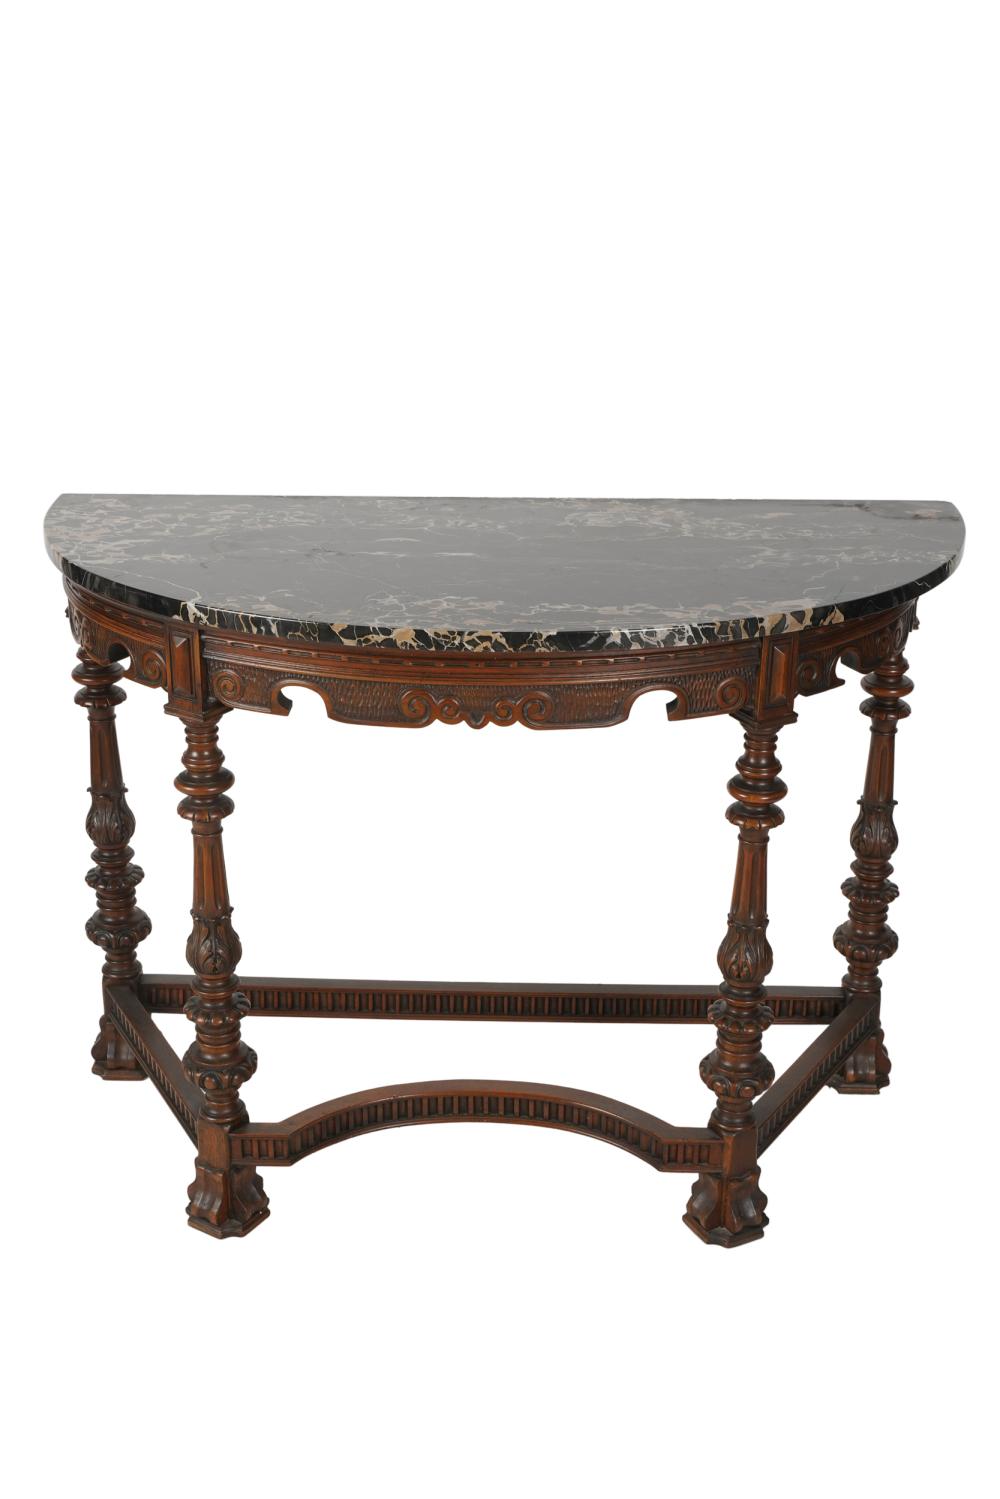 MARBLE TOP CARVED WOOD DEMILUNE 3320d1